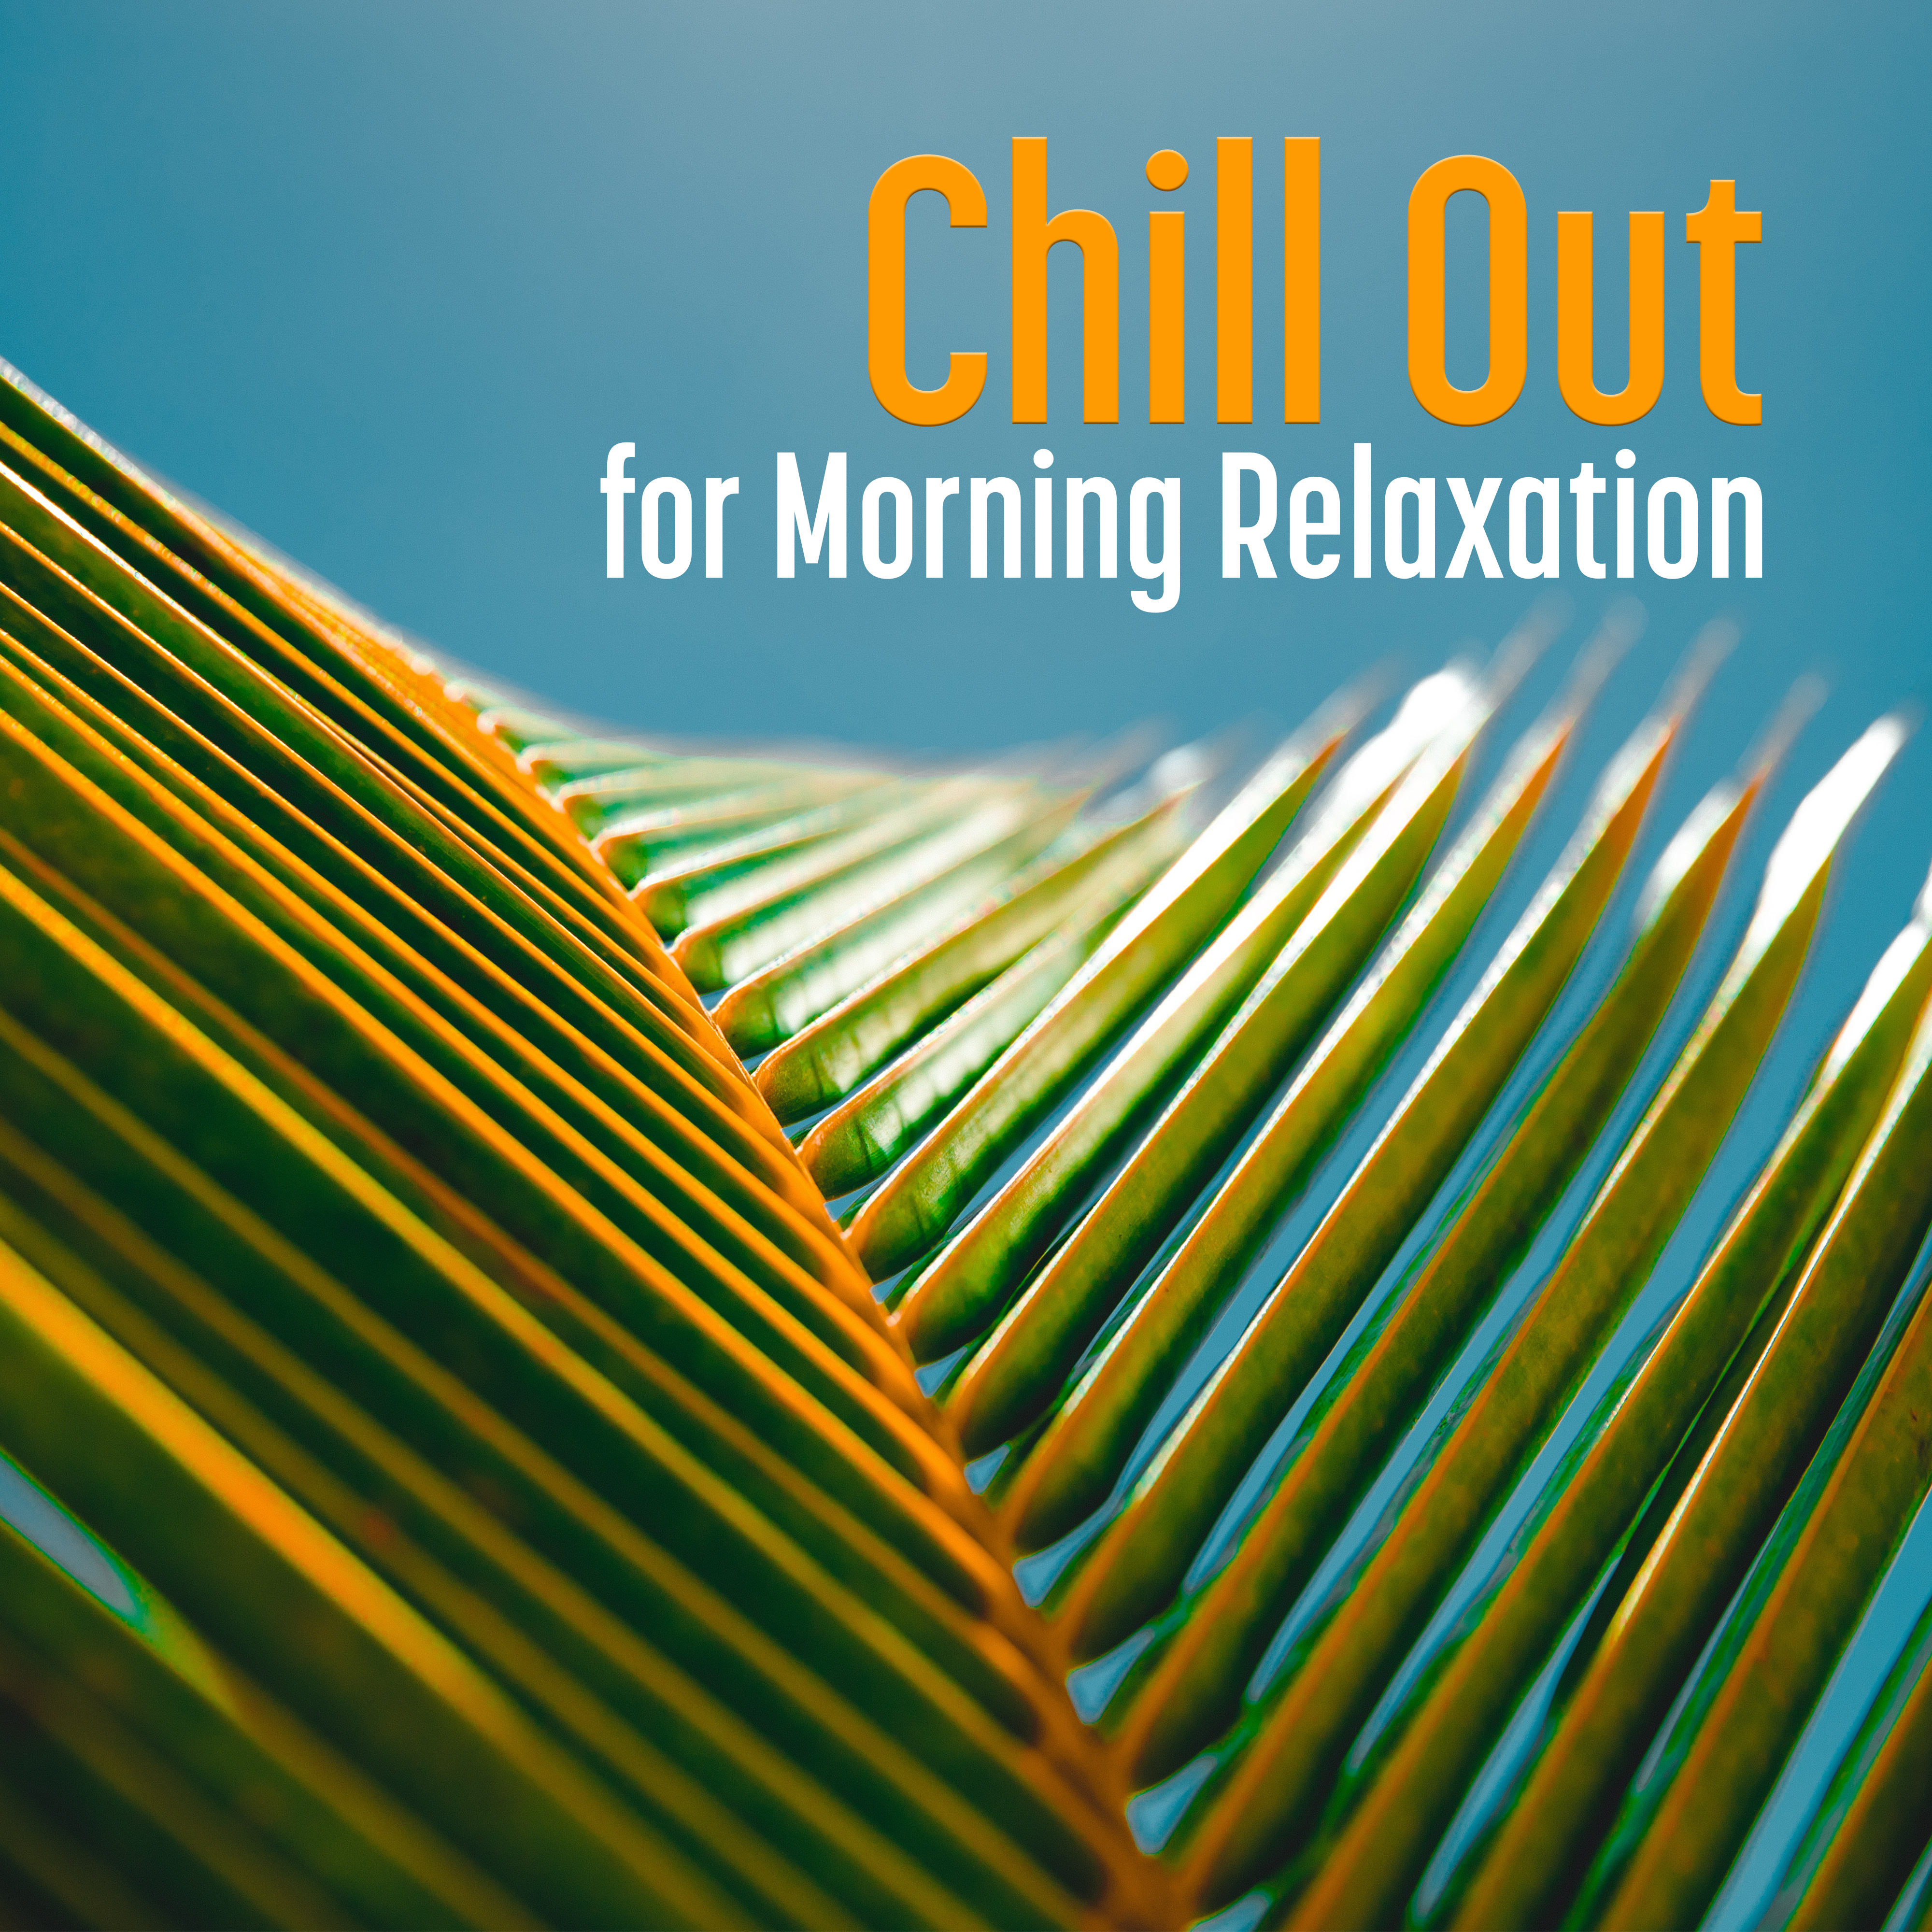 Chill Out for Morning Relaxation